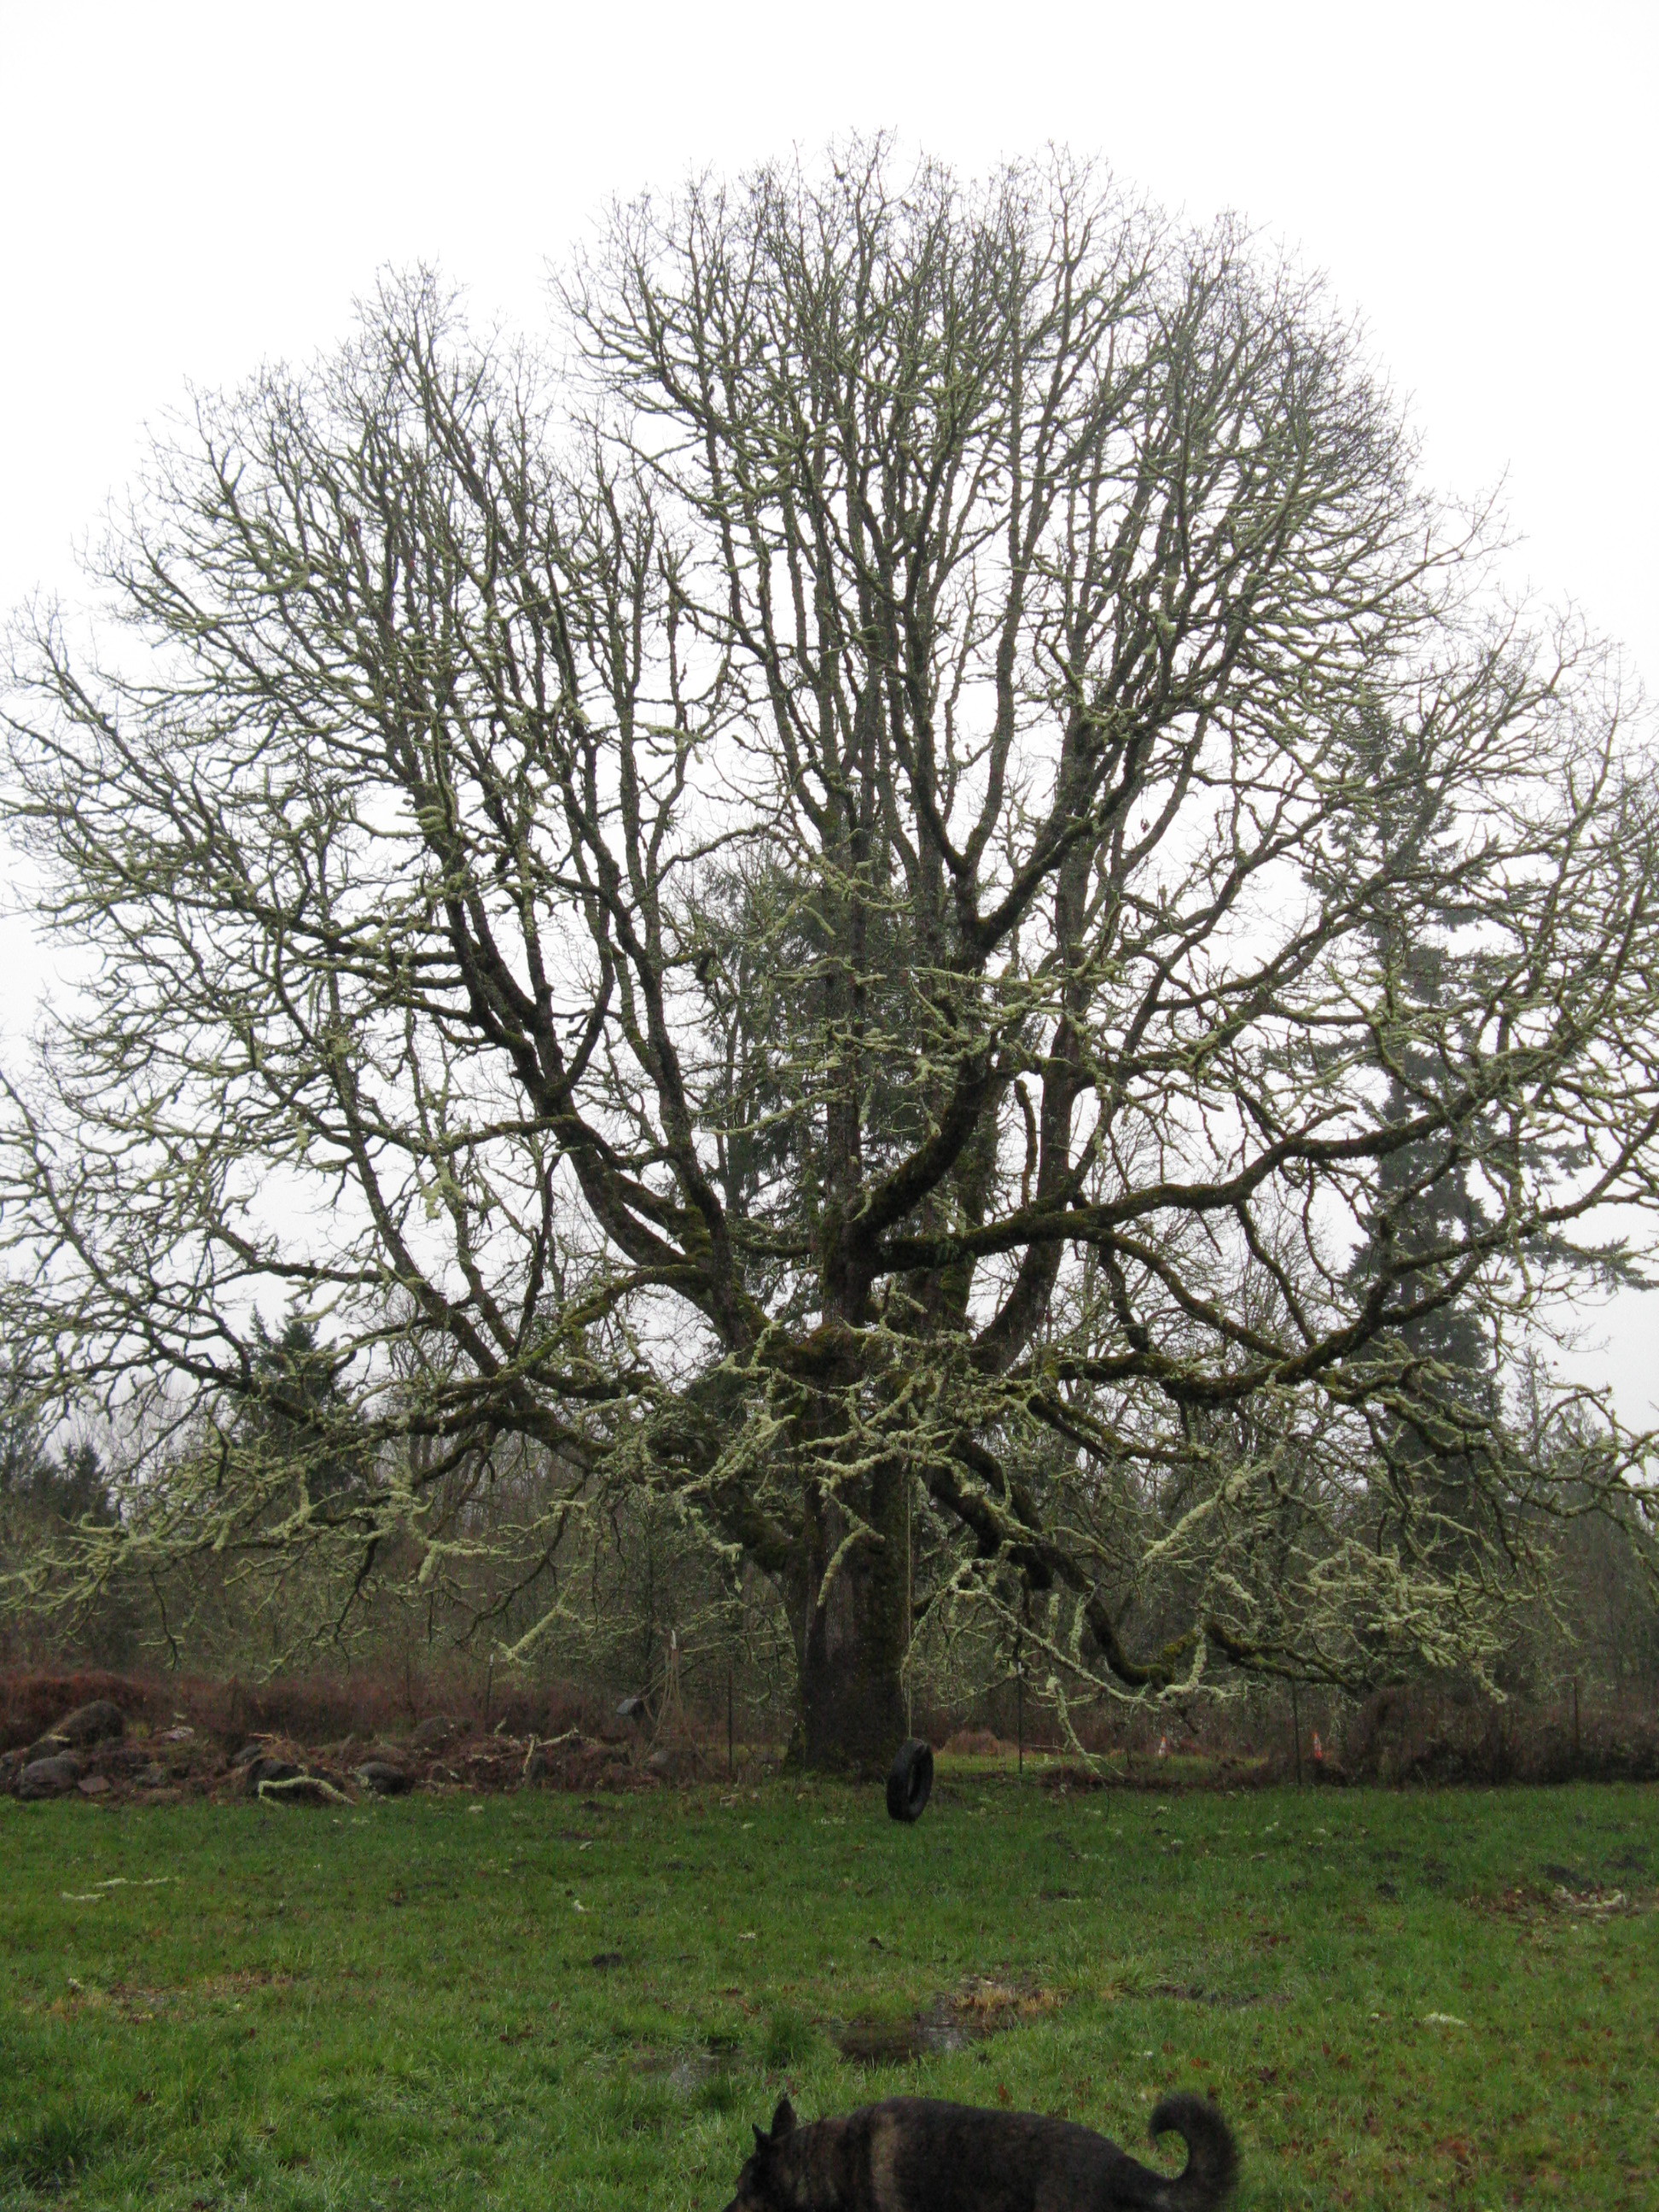 A leafless oak tree towers above a pasture.